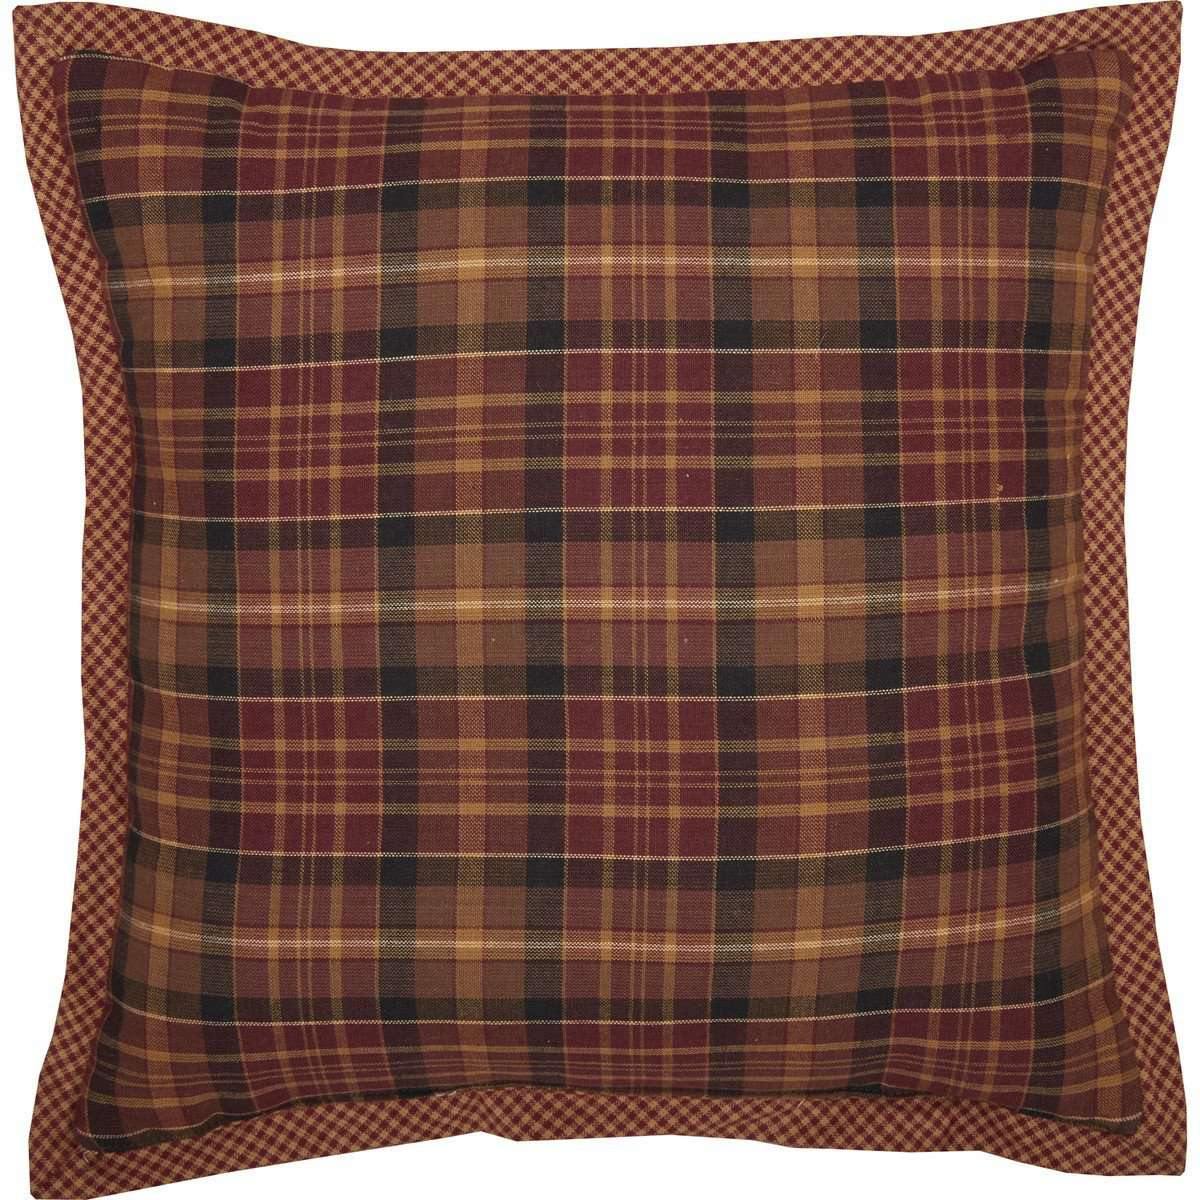 Abilene Star Quilted Pillow 12x12 back